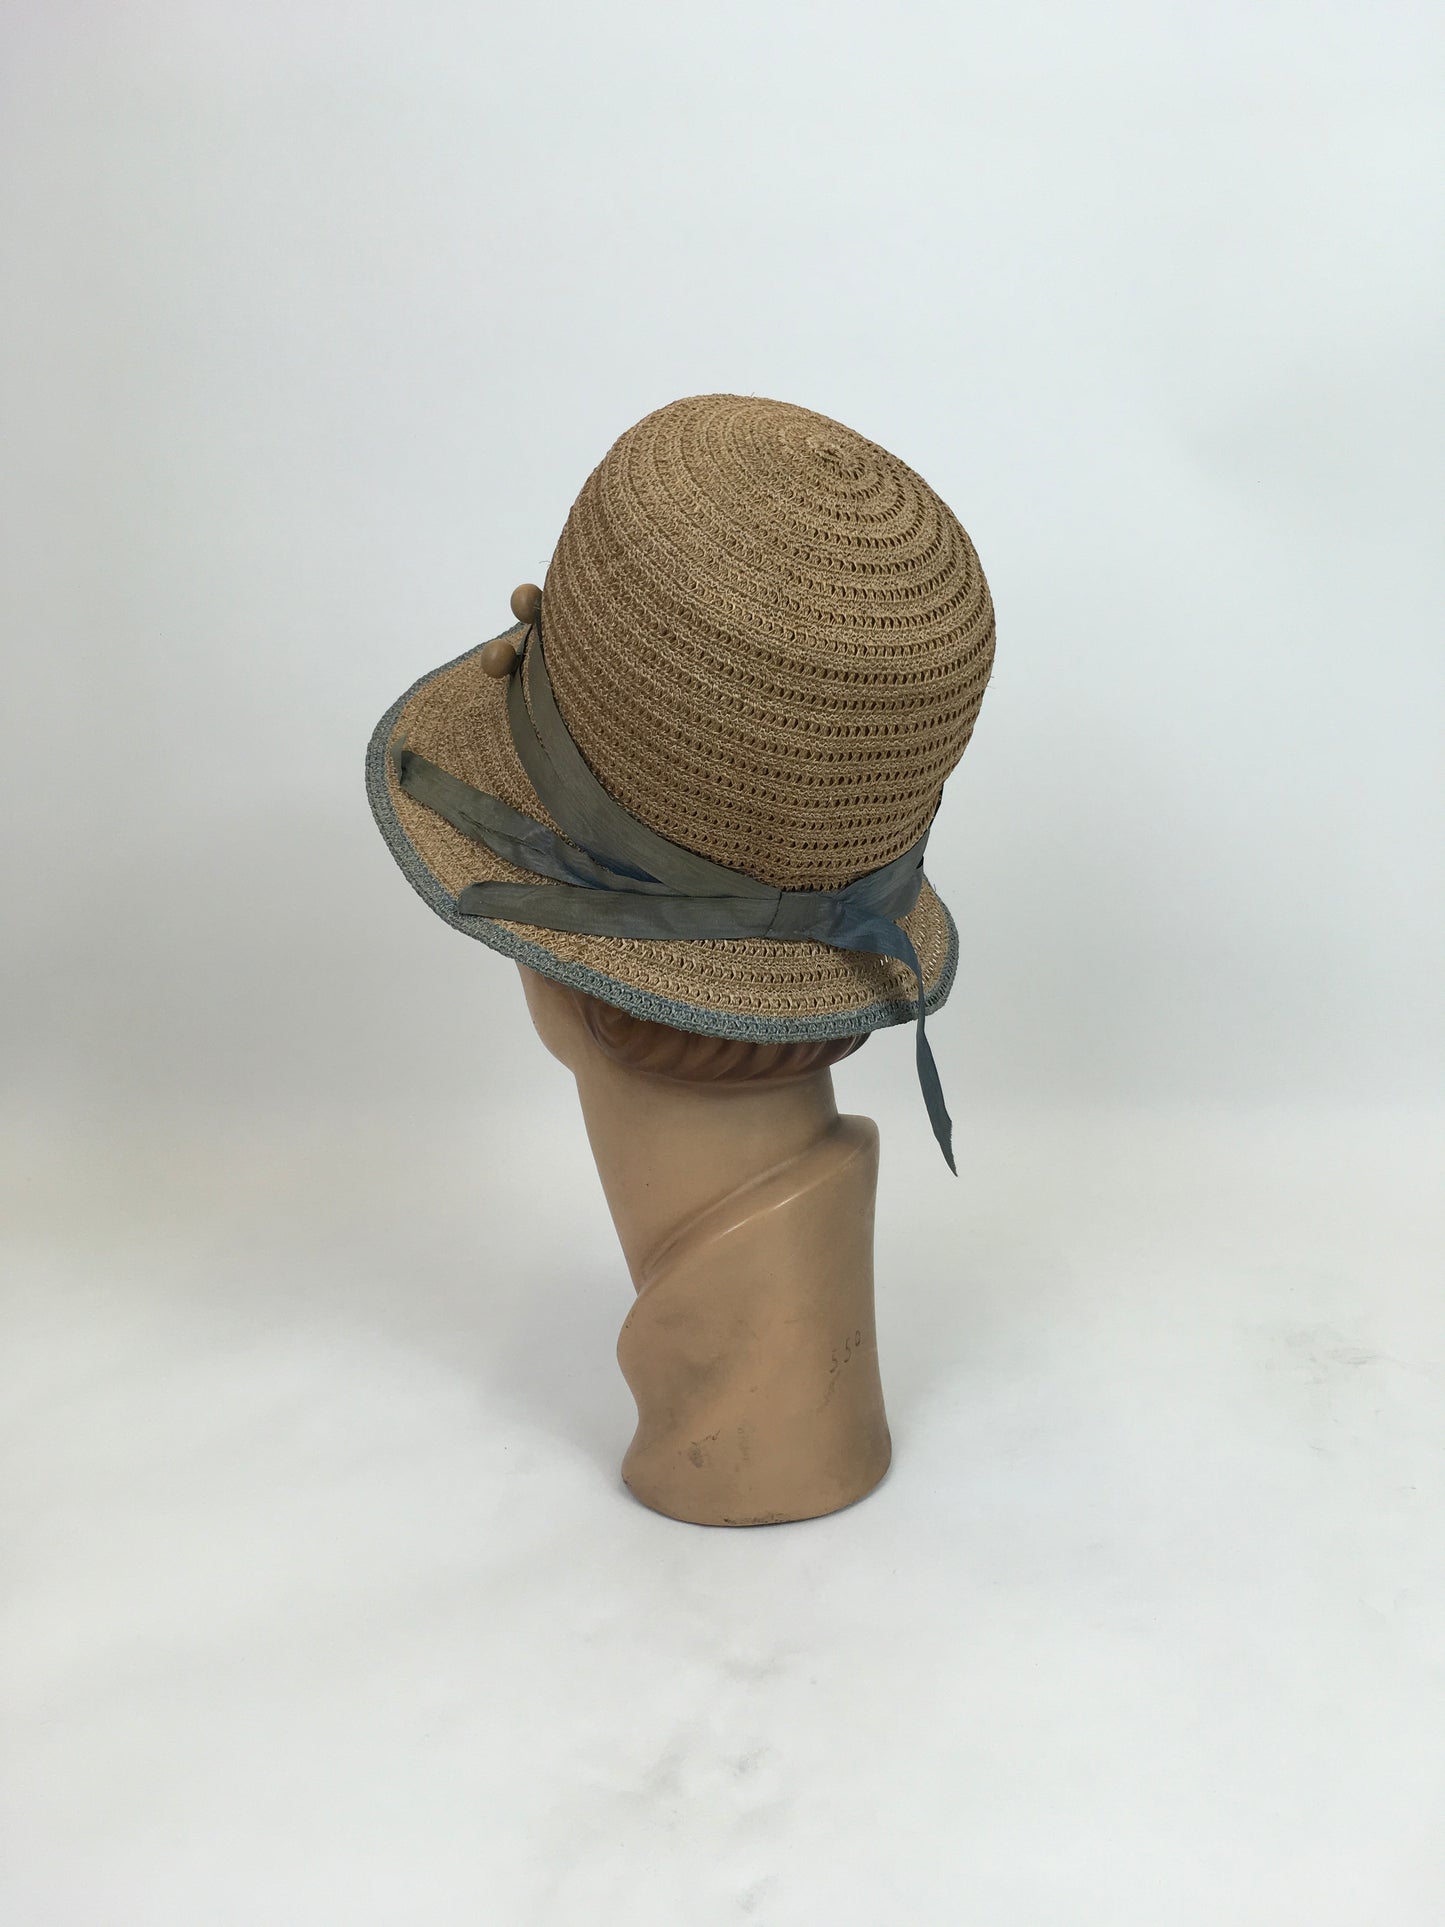 Original 1920's Sublime Natural Sisal Cloche - With Duck Egg Blue Trim and Wooden Ball Embellishment